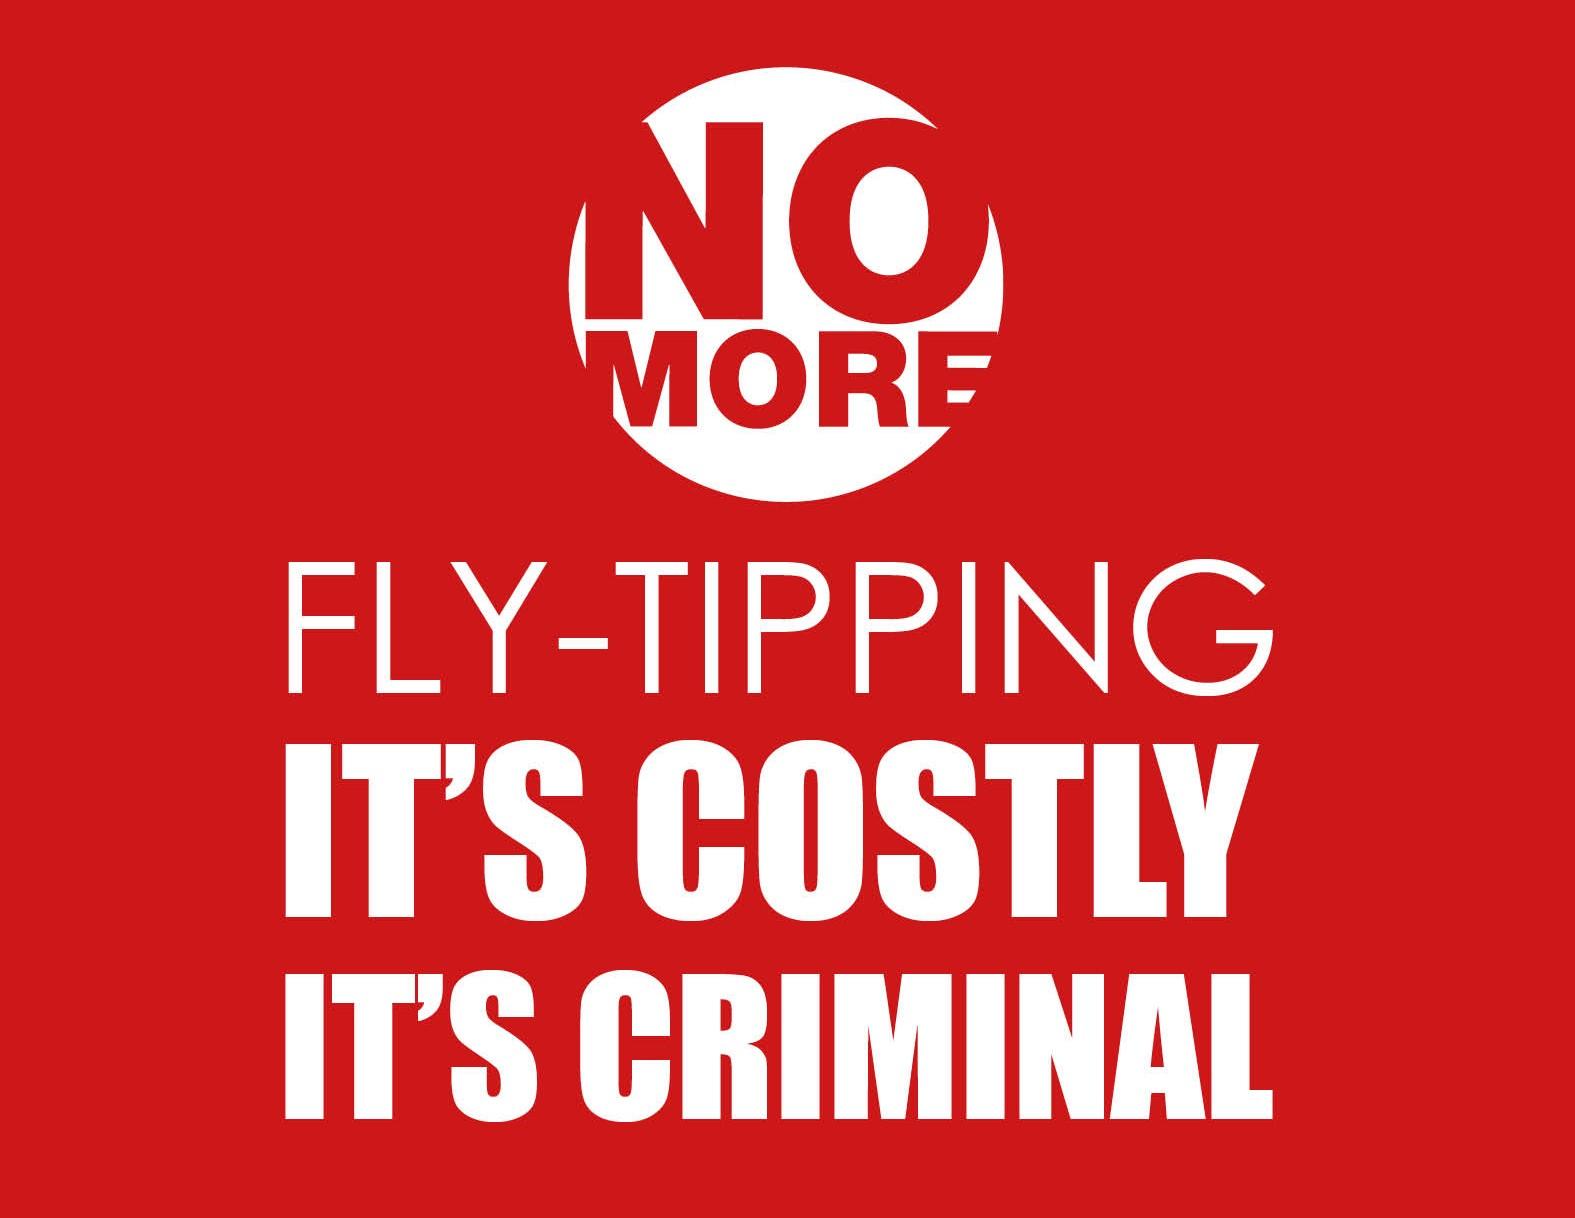 No more fly-tipping banner